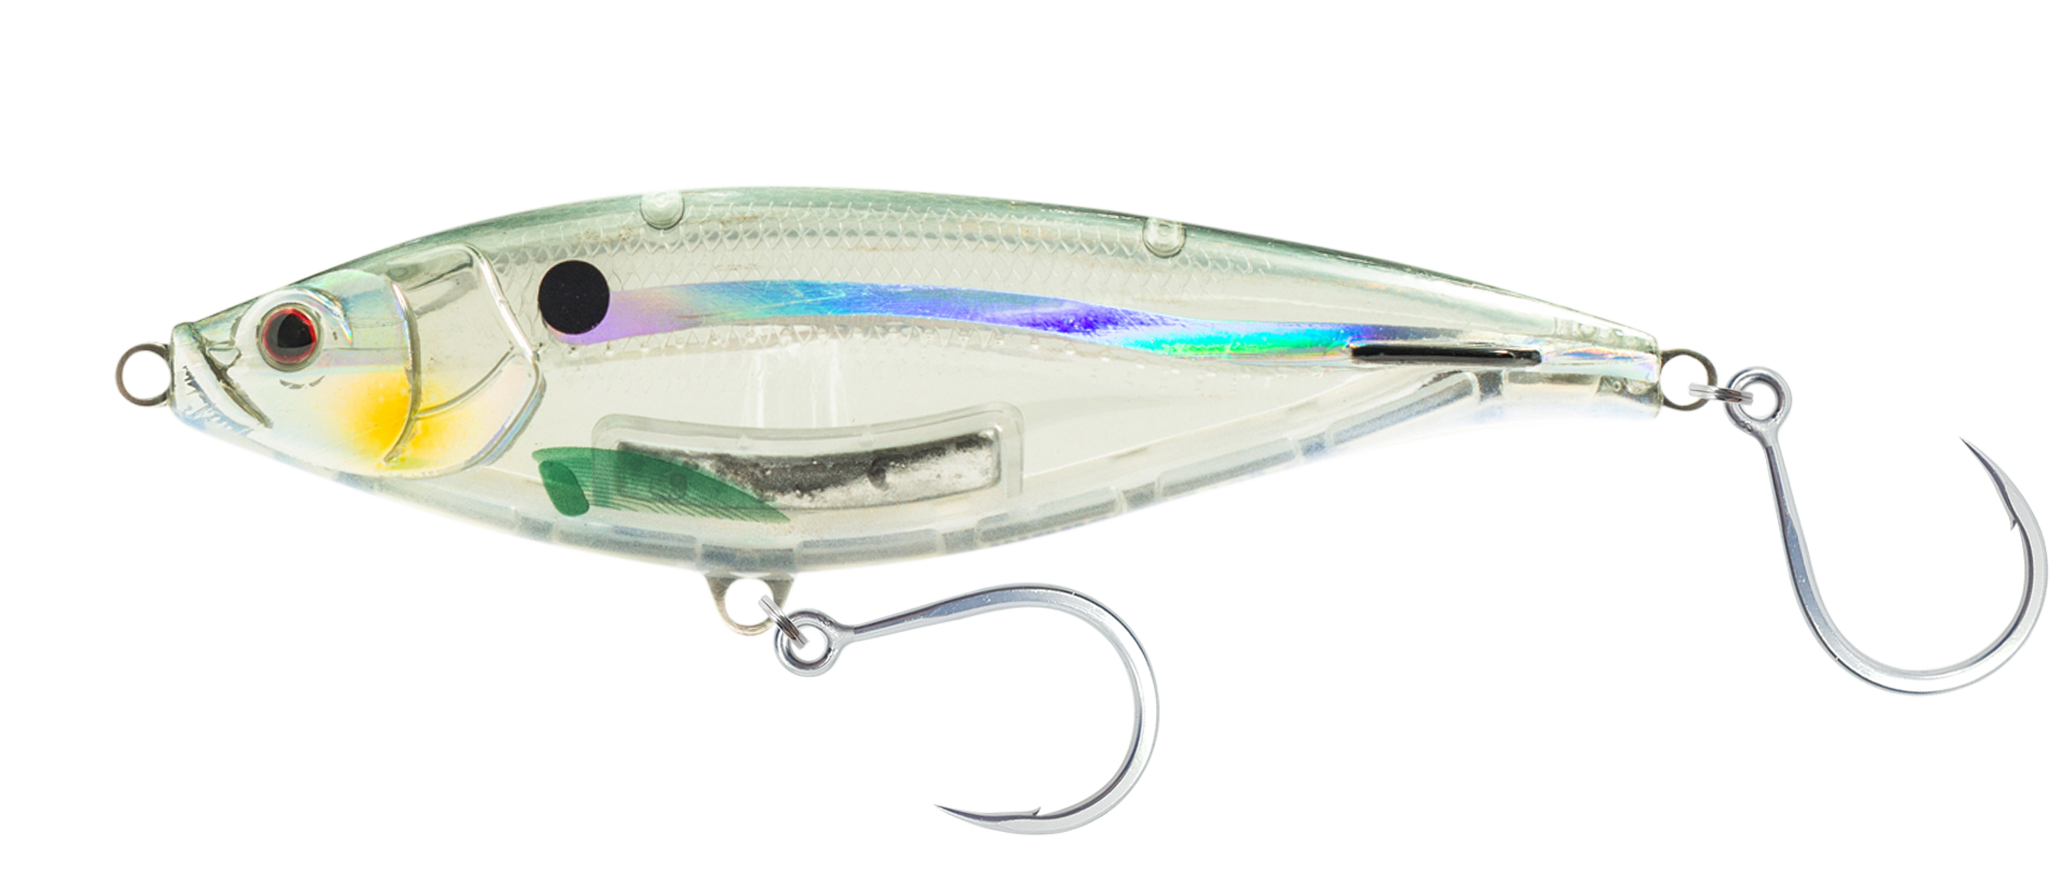 Nomad Madscad Sinking Lures